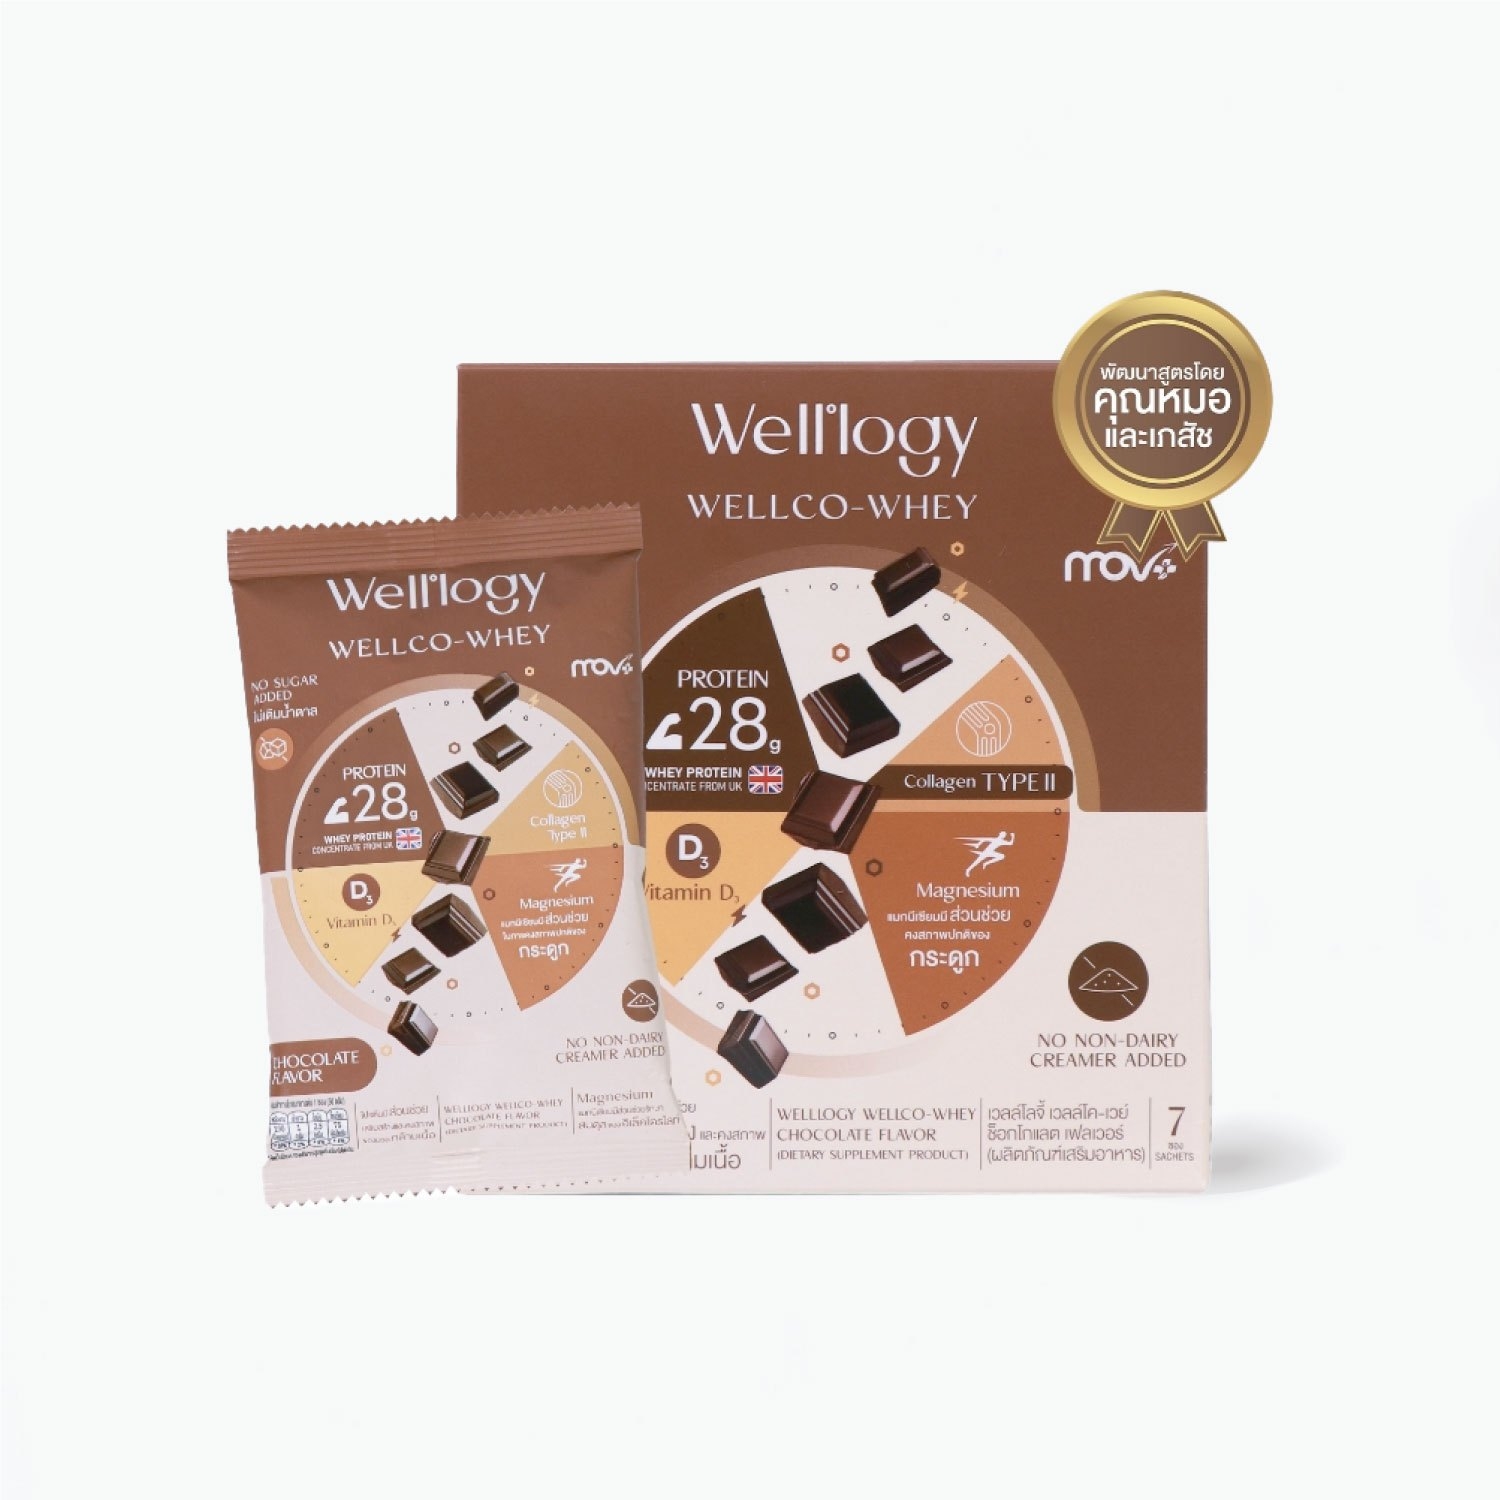 Well-logy Wellco-Whey Concentrate Protein - Chocolate Flavor (Box)